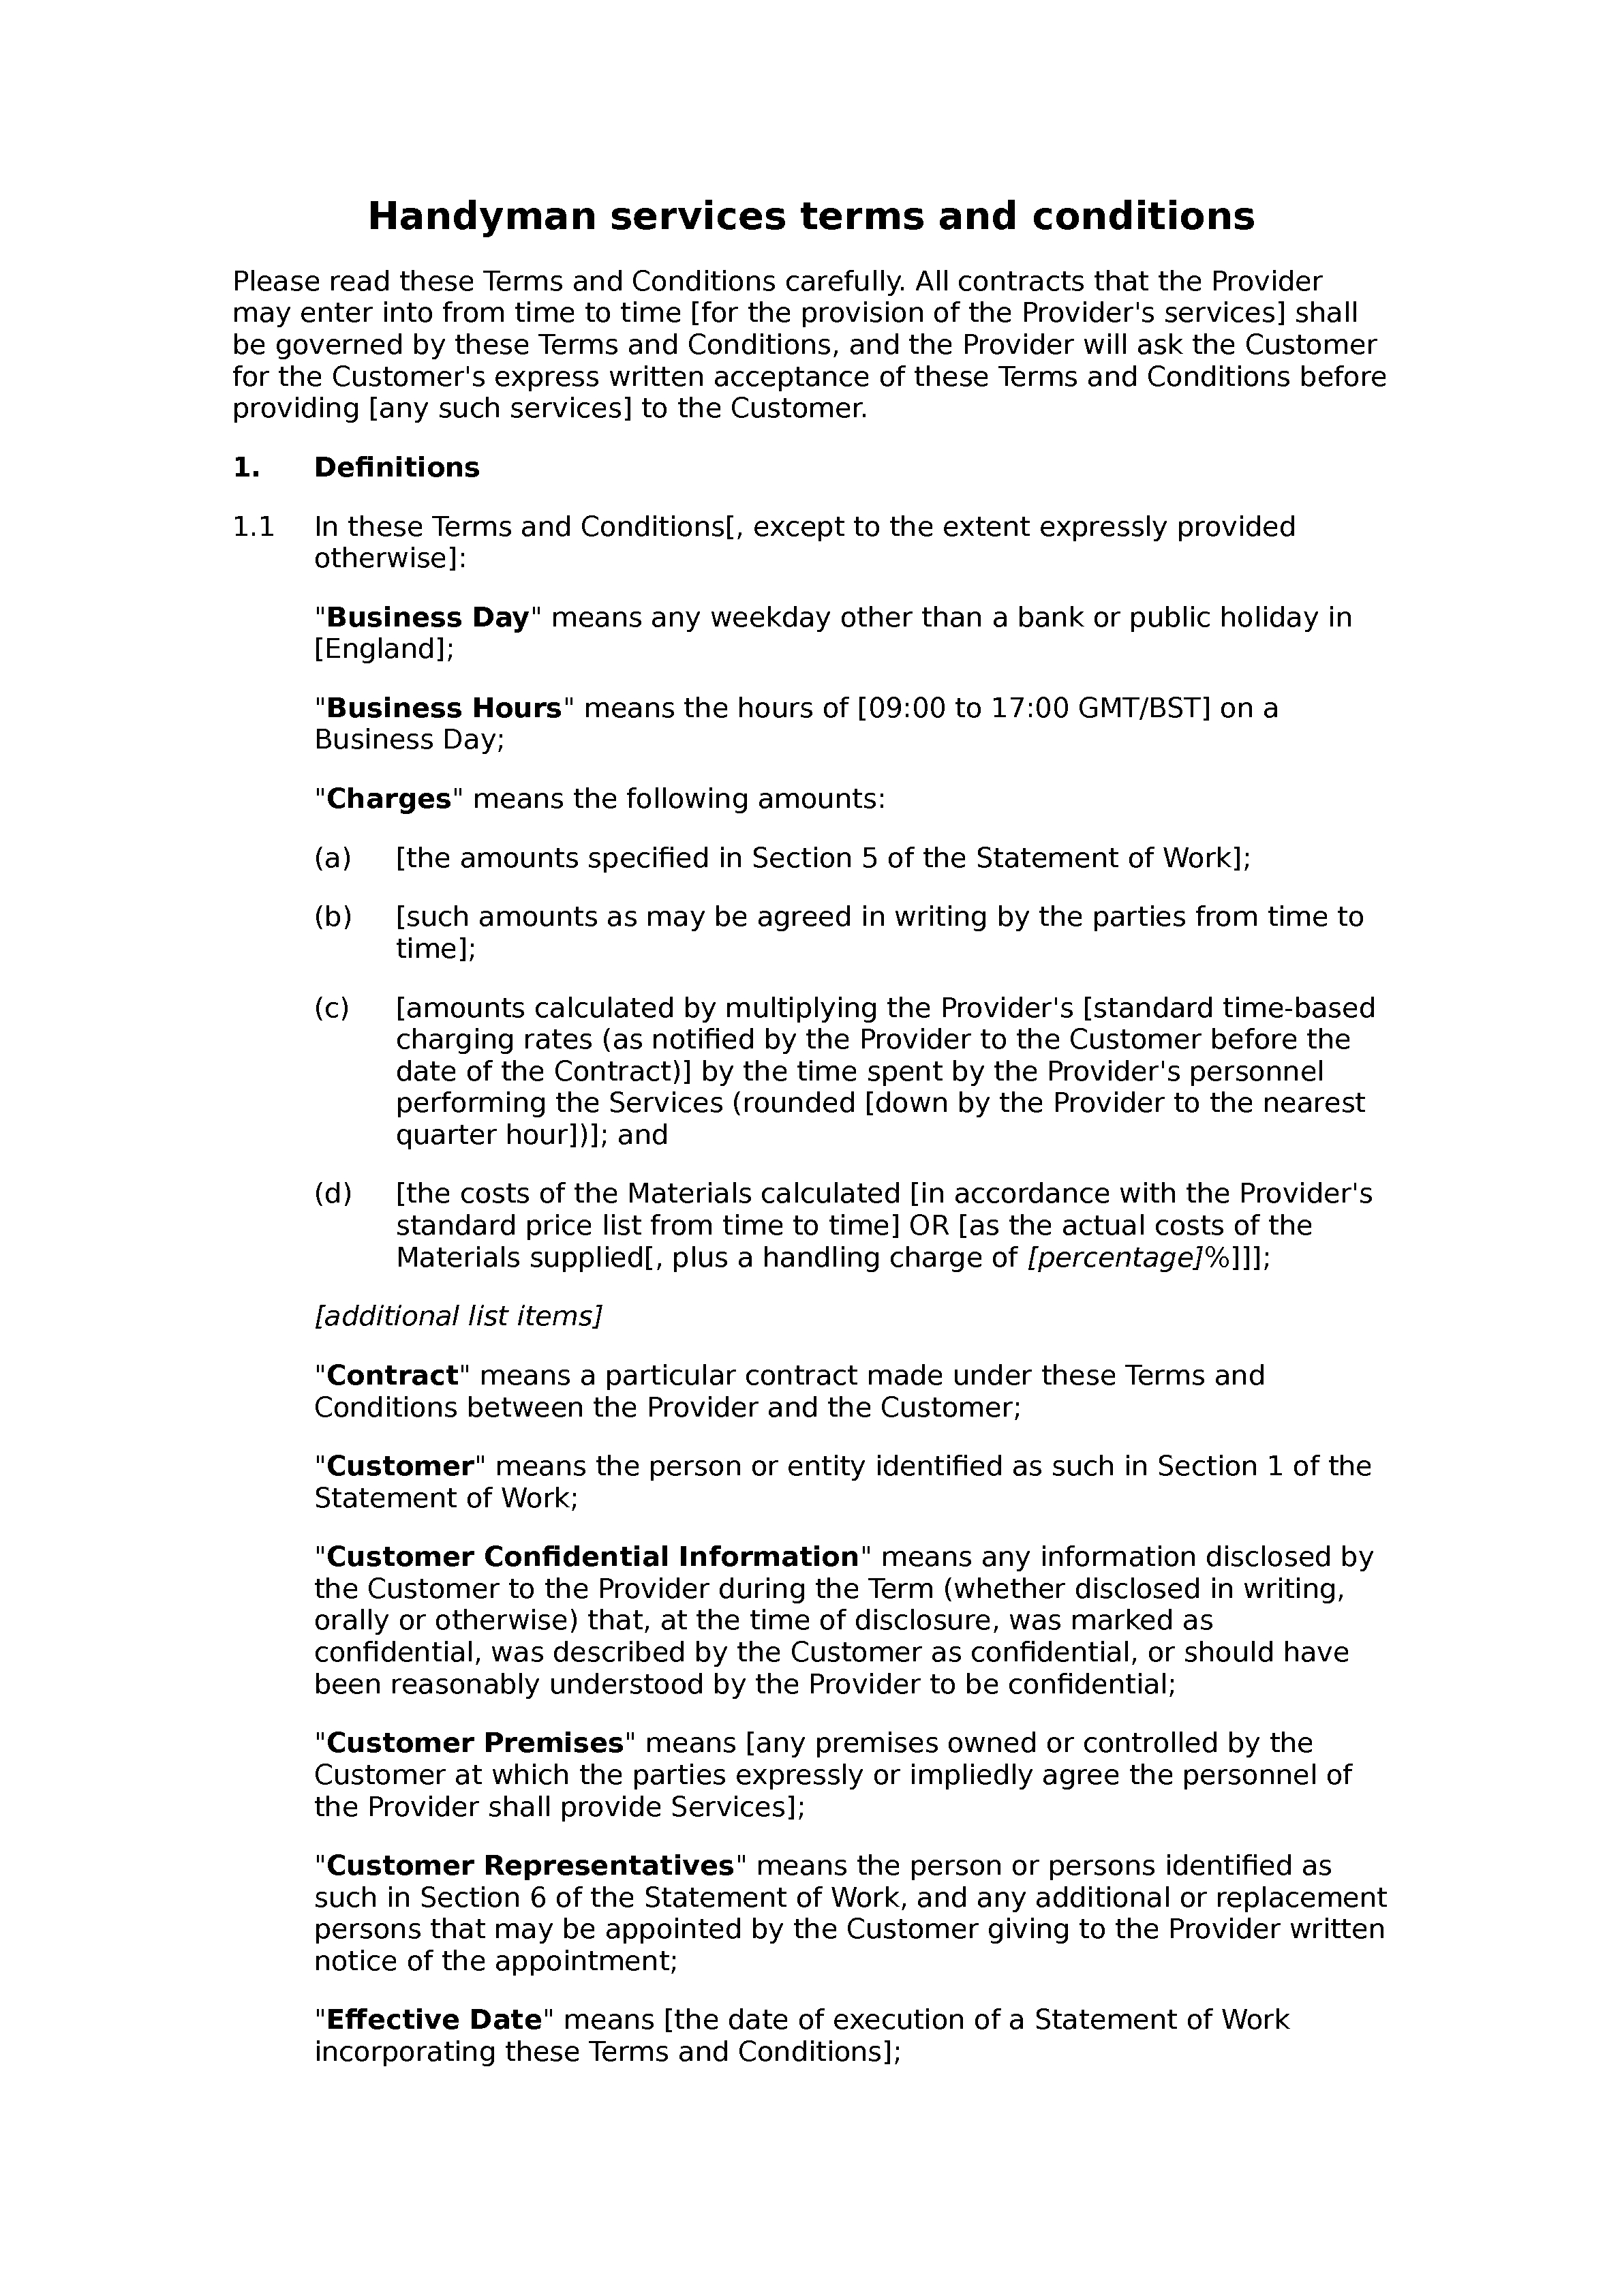 handyman services terms and conditions docular handyman terms and conditions template